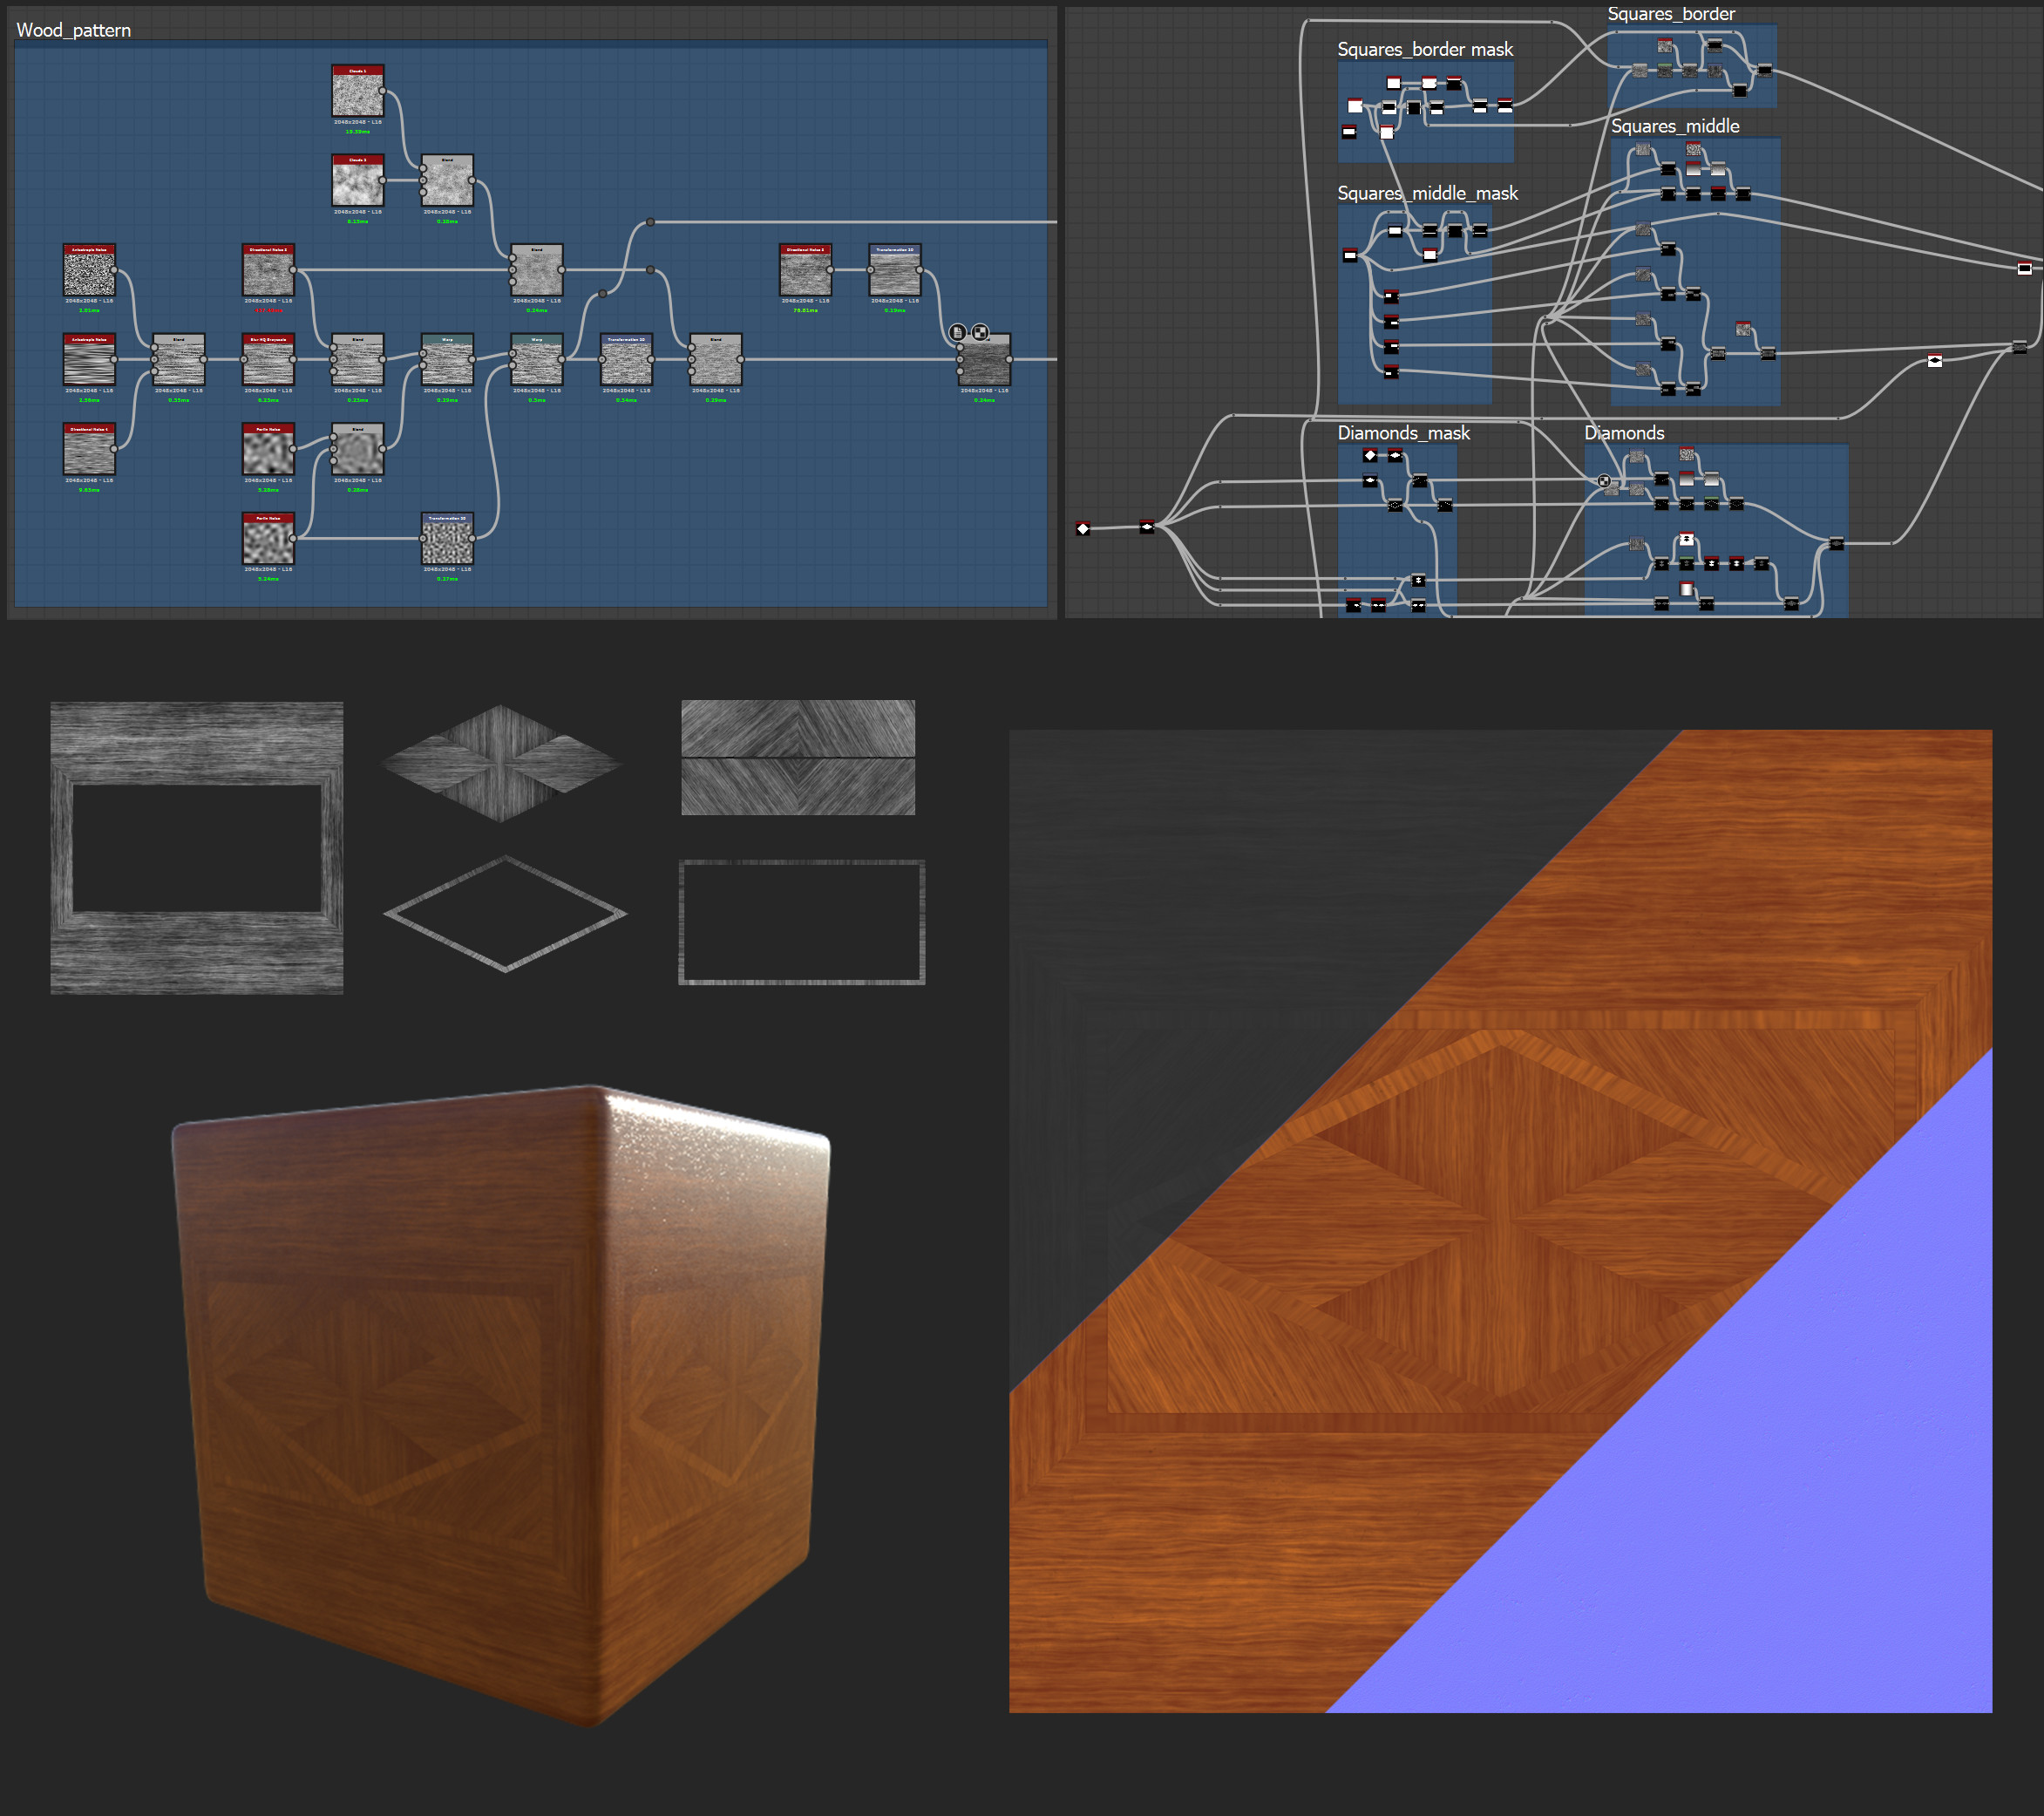 Creating the wood texture.